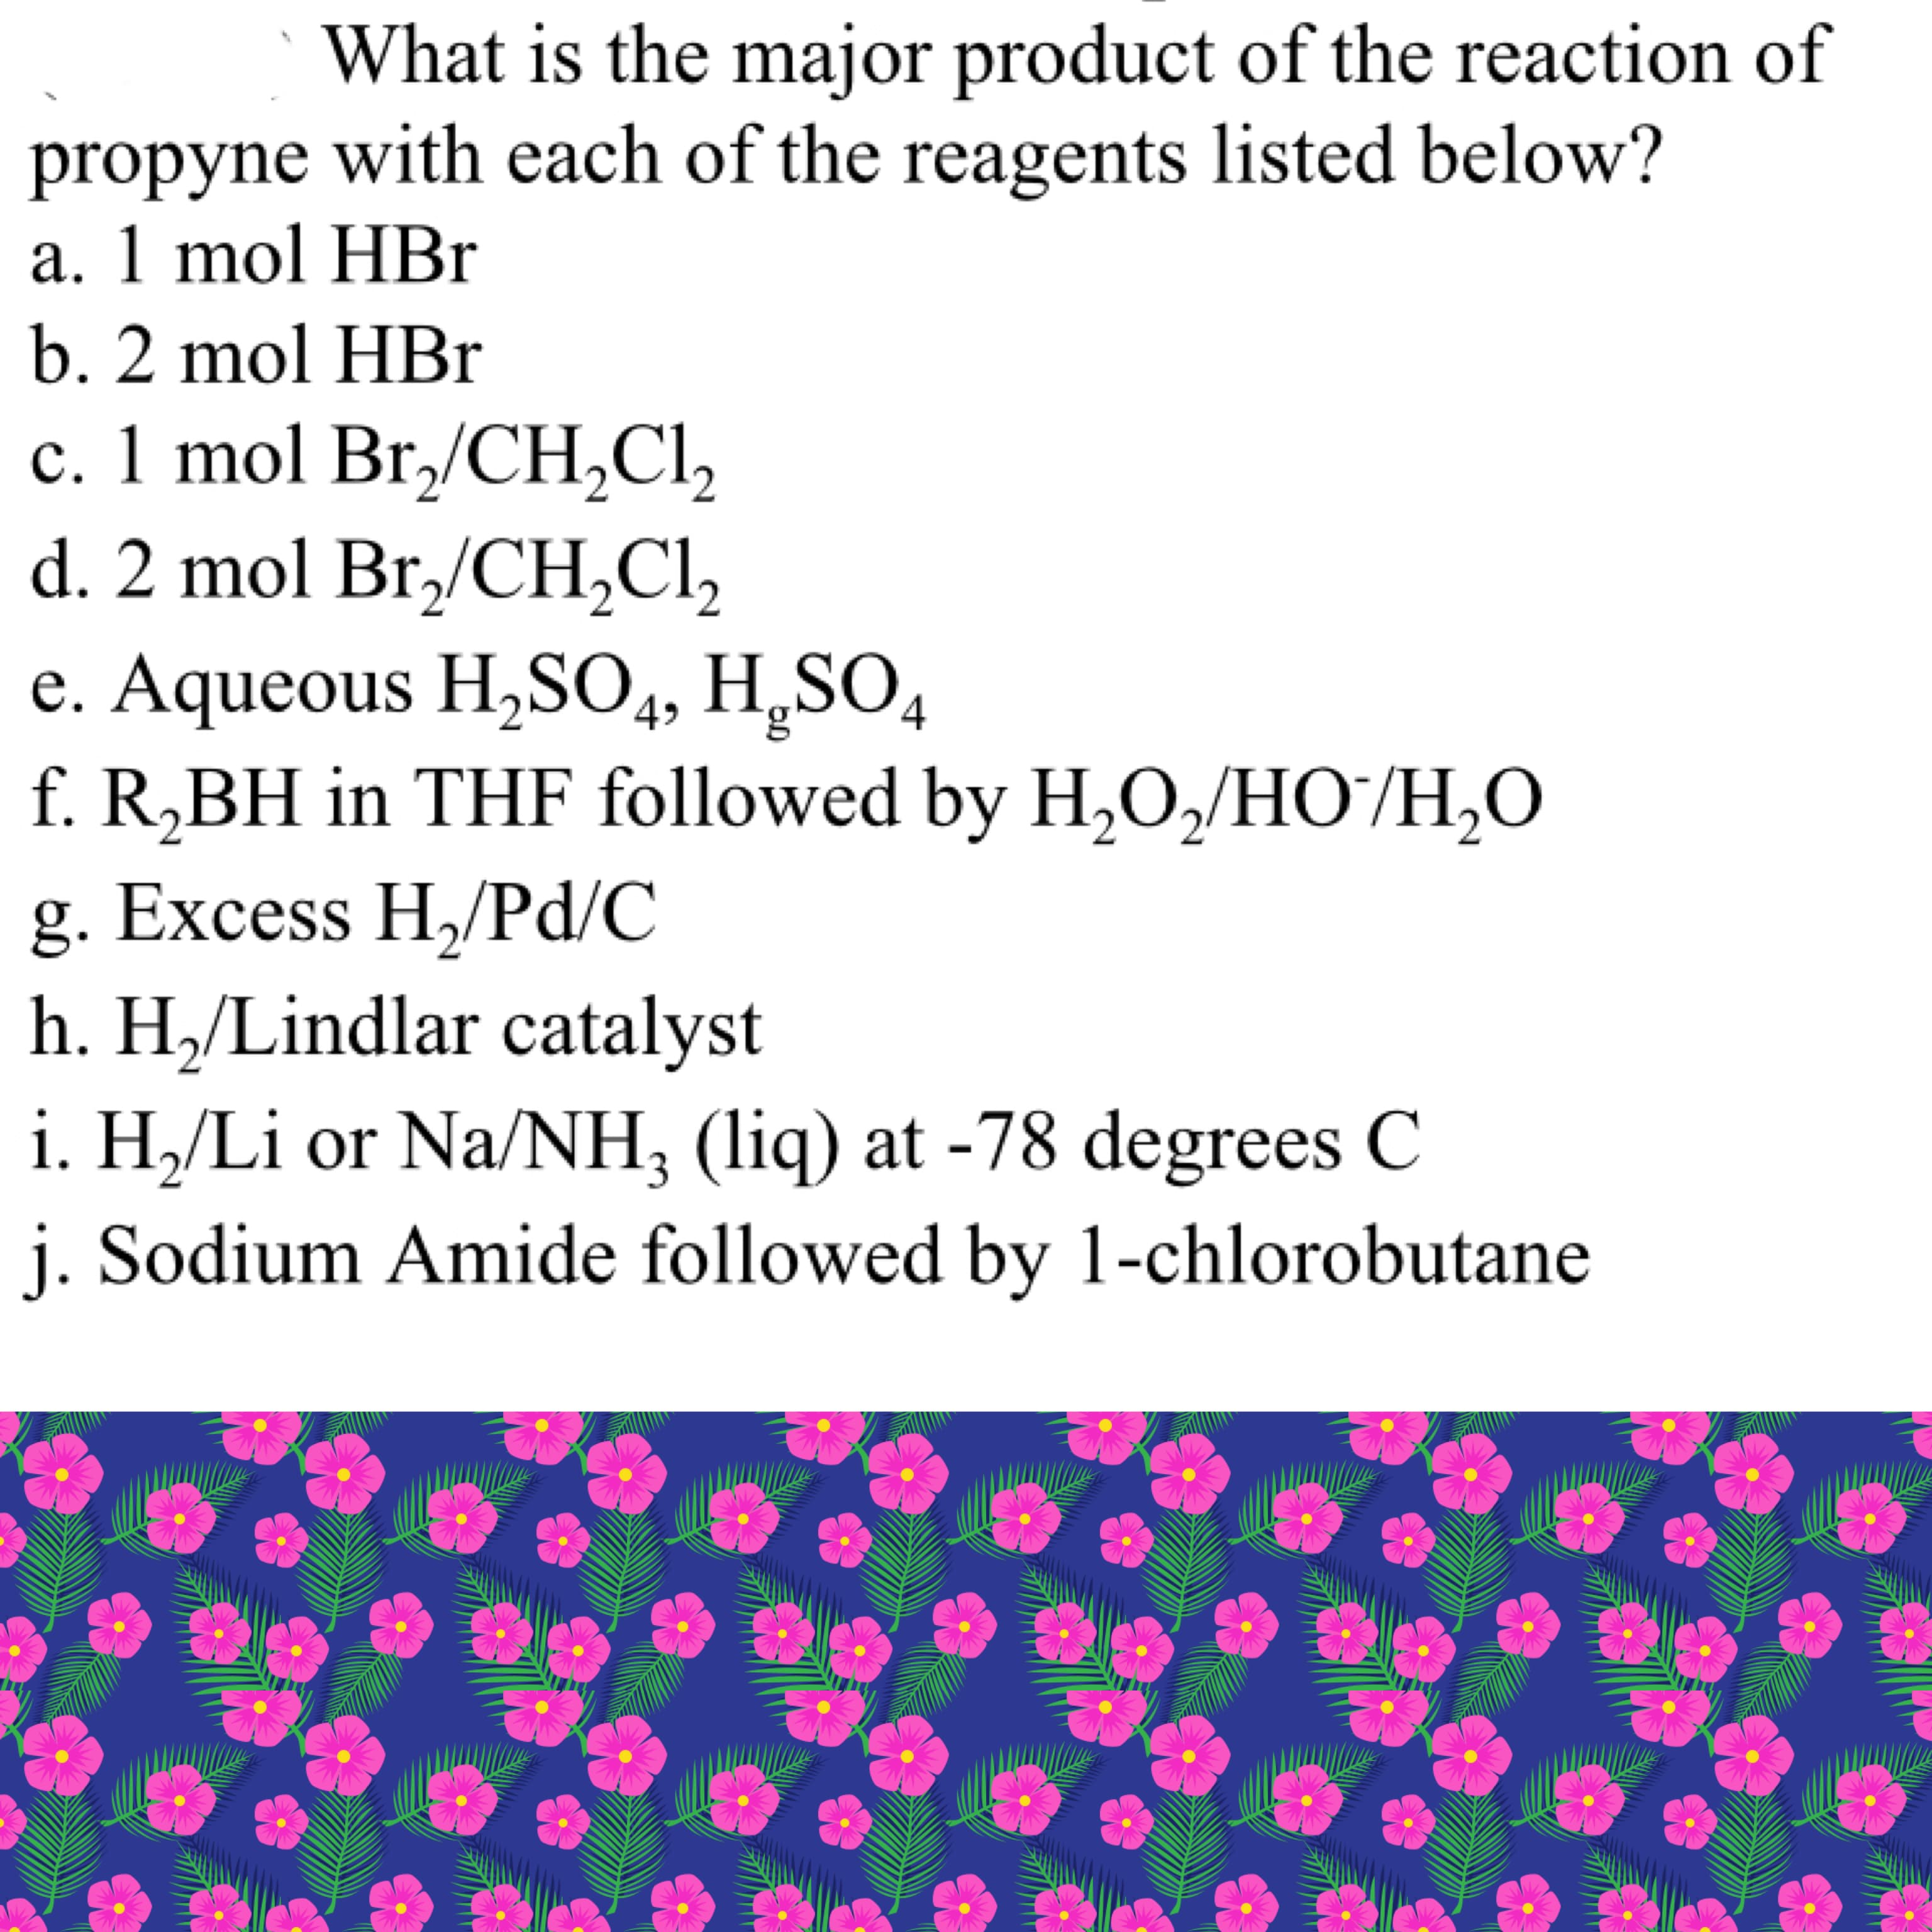 What is the major product of the reaction of
propyne with each of the reagents listed below?
a. 1 mol HBr
b. 2 mol HBr
c. 1 mol Br,/CH,Cl,
d. 2 mol Br,/CH,Cl,
e. Aqueous H,SO4, H,SO,
f. R,BH in THF followed by H,O,/HOʻ/H,O
